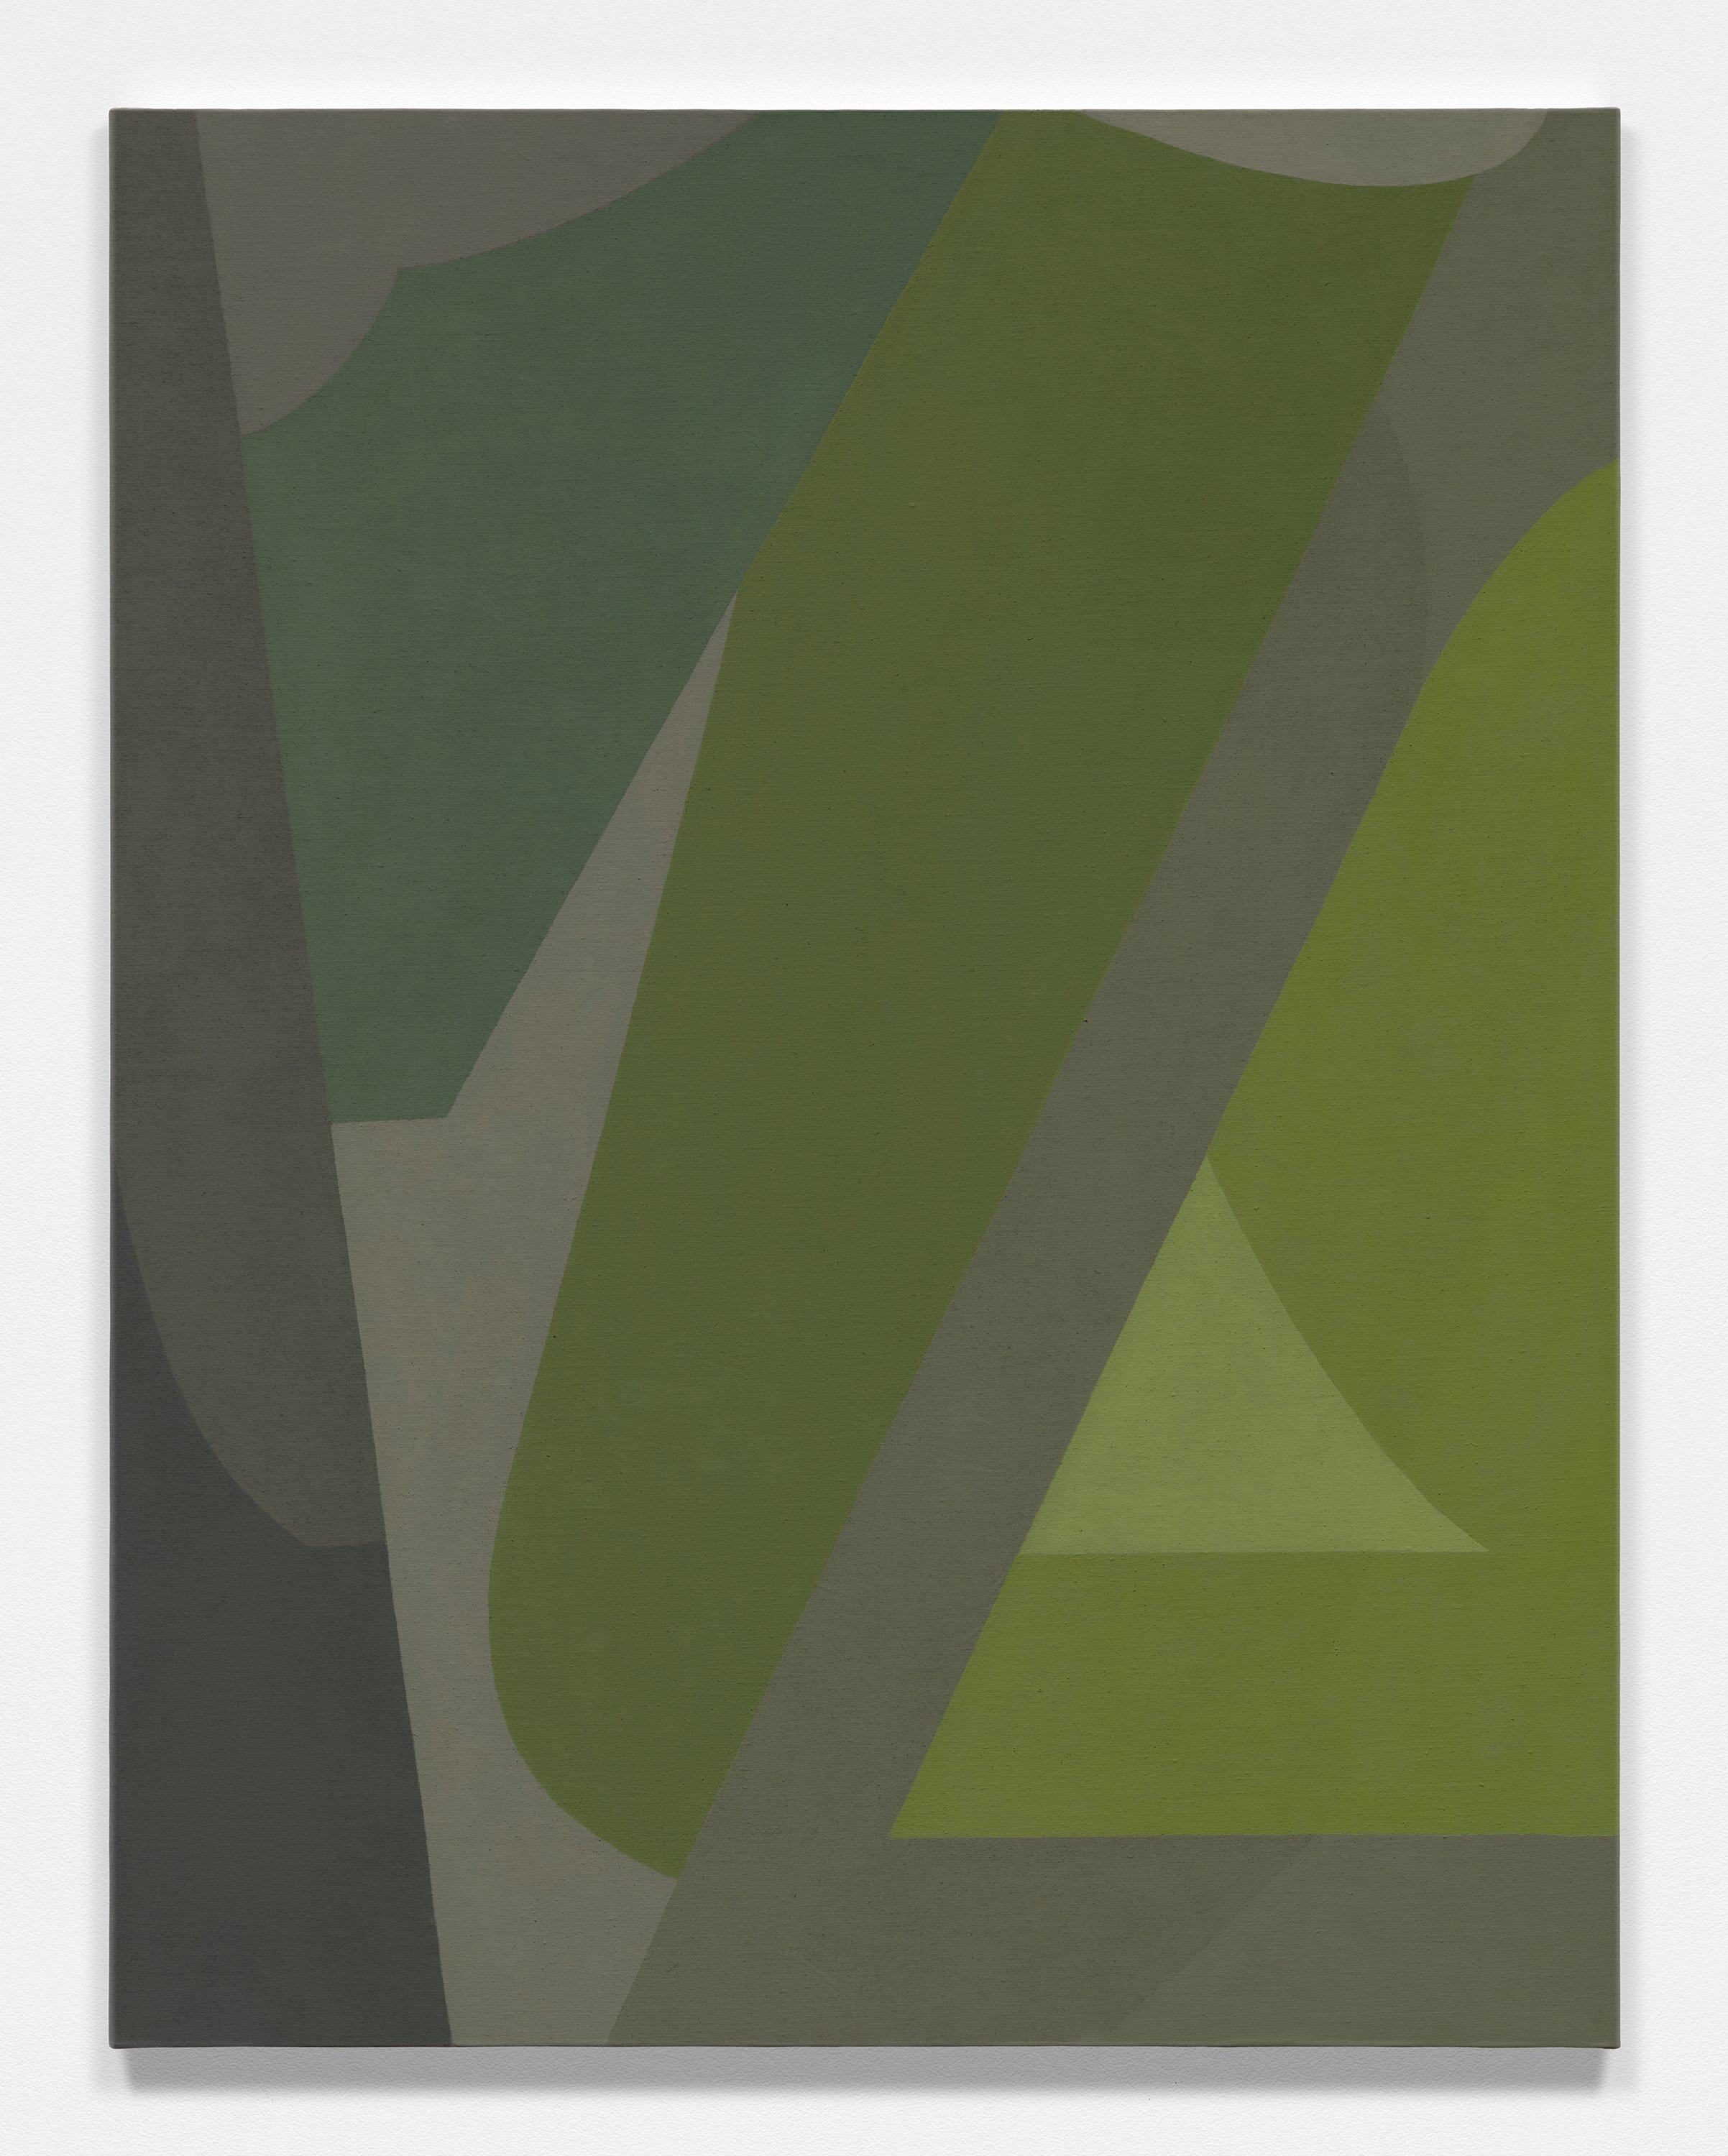  Nancy White    Untitled 06_2023 , 2023 acrylic on linen 34" x 26"   INQUIRE   